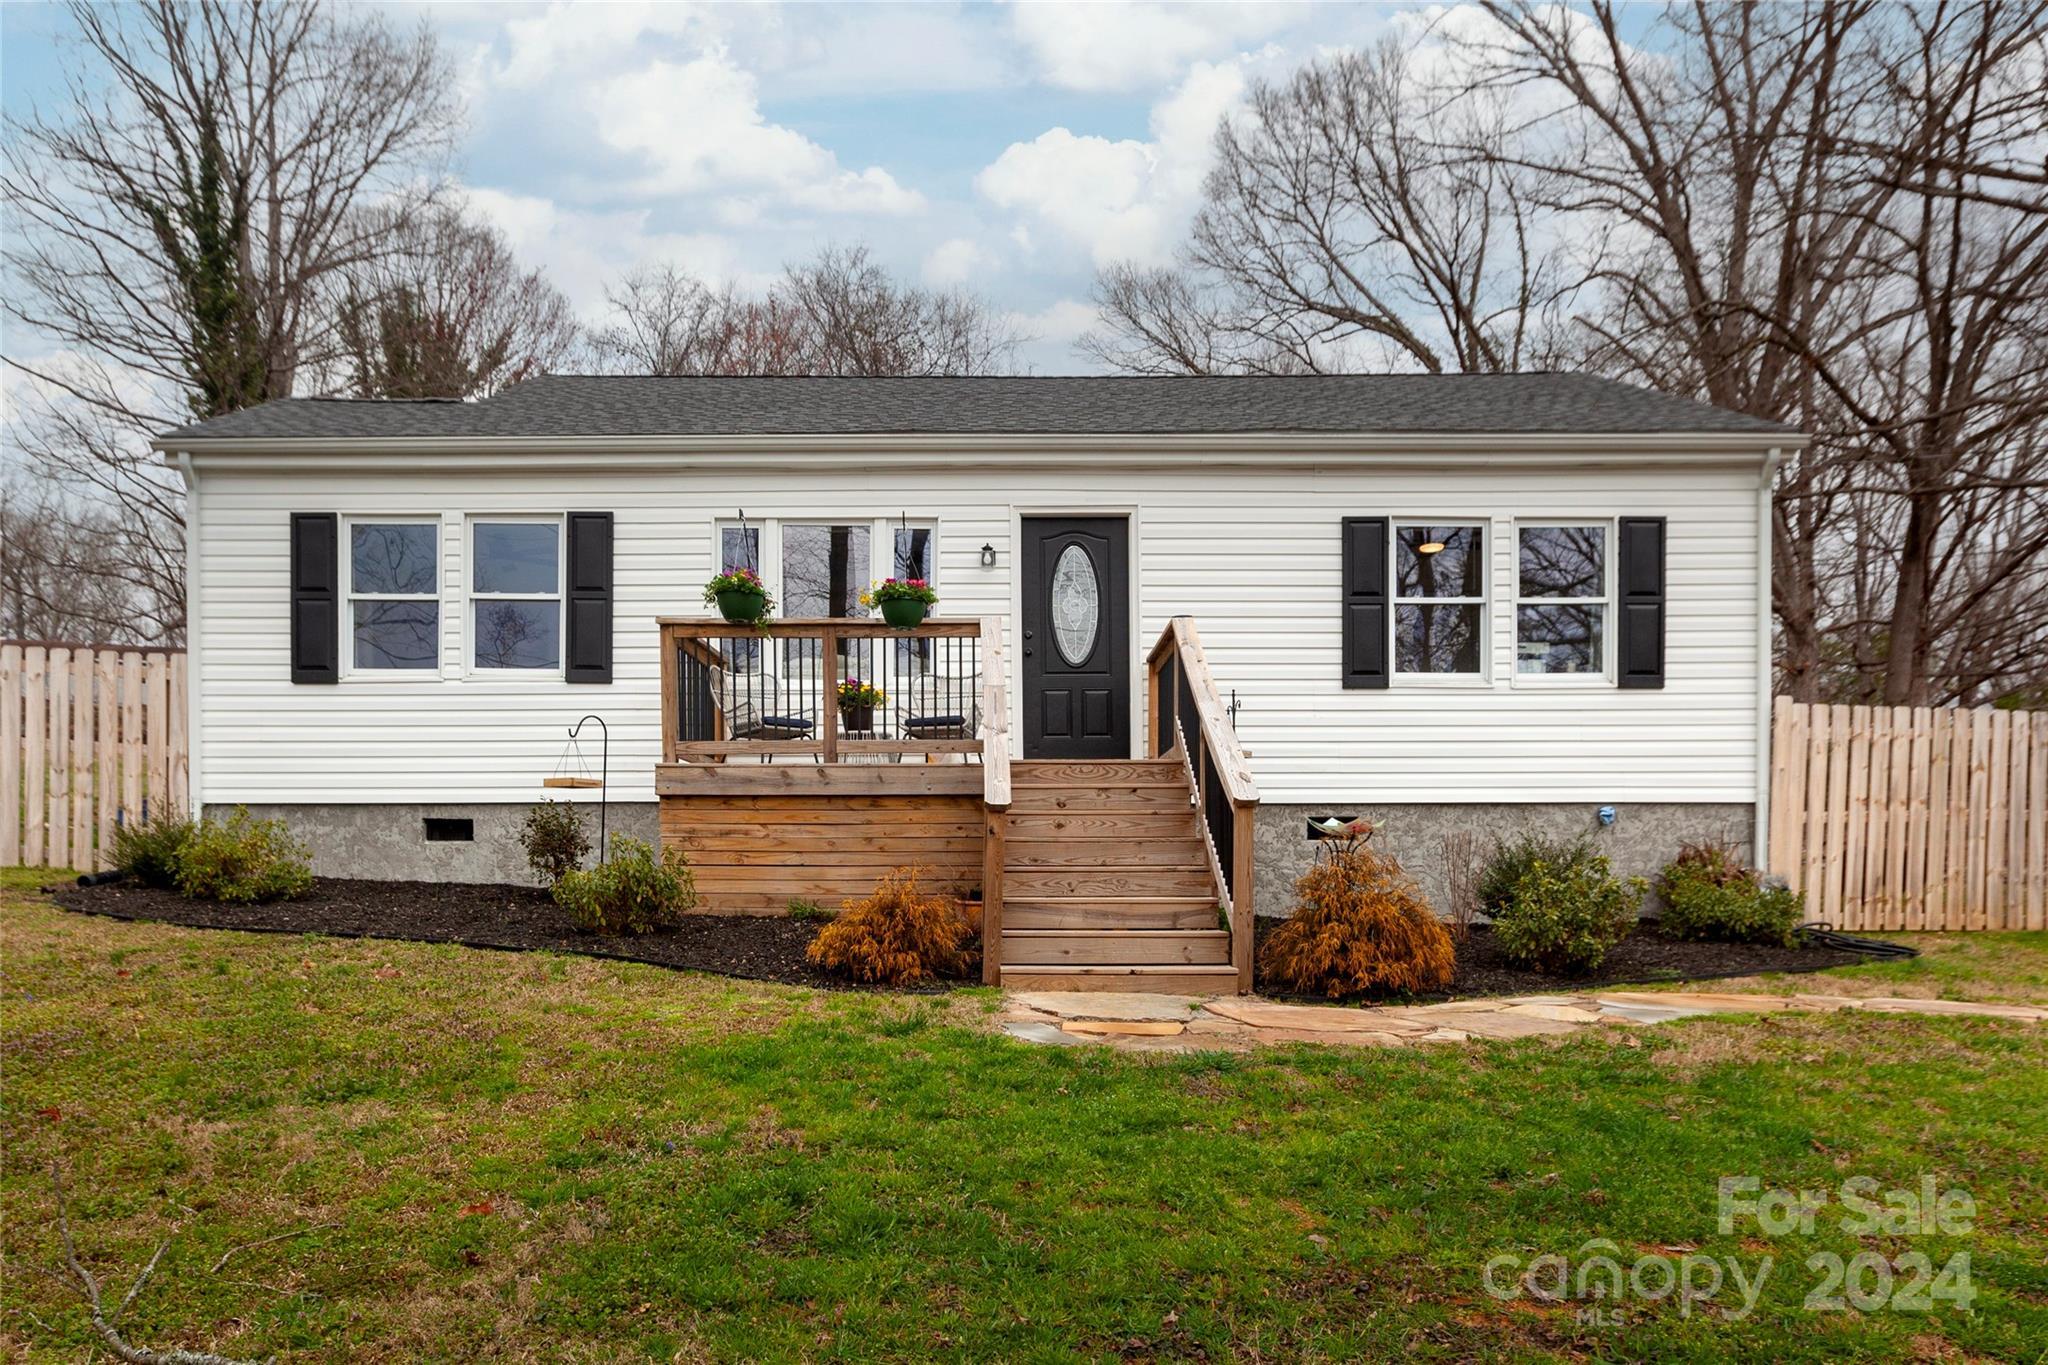 Photo one of 147 Nomad Ln Lancaster SC 29720 | MLS 4113540